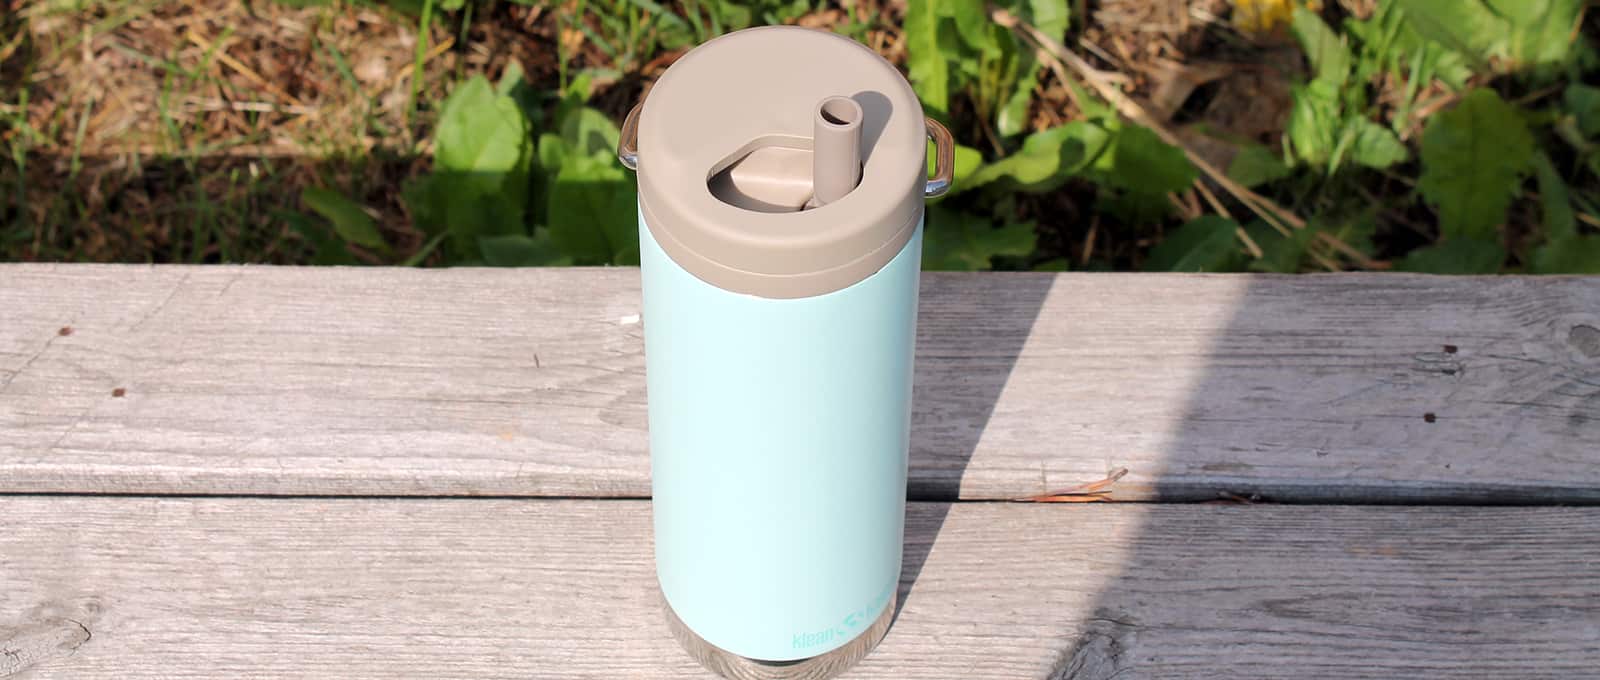 https://esyy7quo2ge.exactdn.com/wp-content/uploads/2021/07/Klean-Kanteen-Insulated-TKWide-16-feature-5.jpg?lossy=1&quality=92&ssl=1